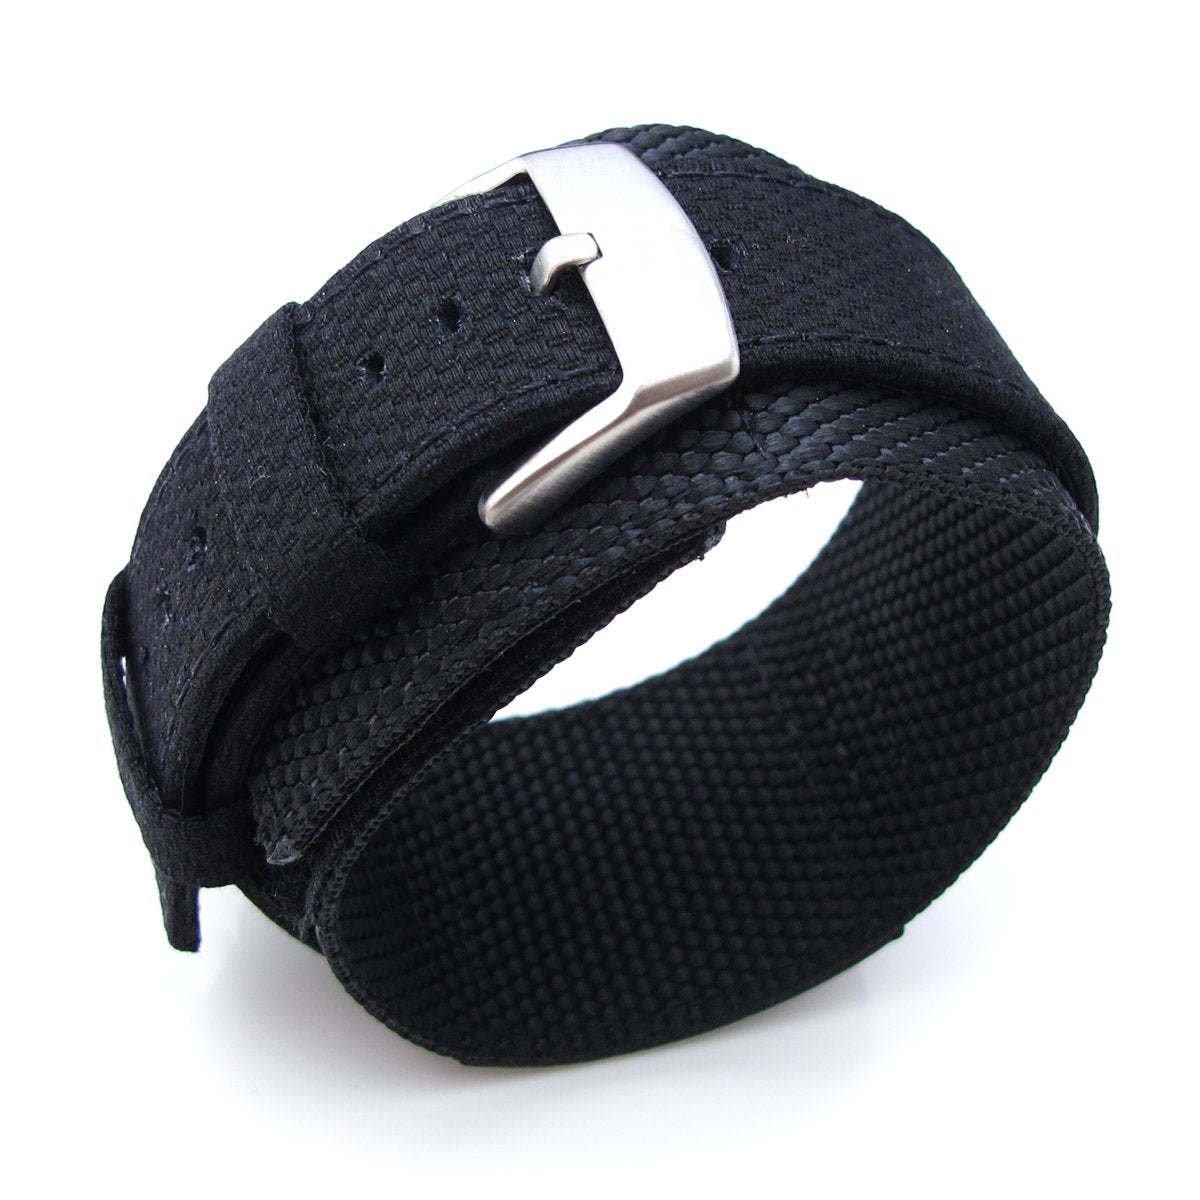 MiLTAT 21mm Double Layer Nylon Black Tactical Velcro Watch Strap Strapcode Watch Bands